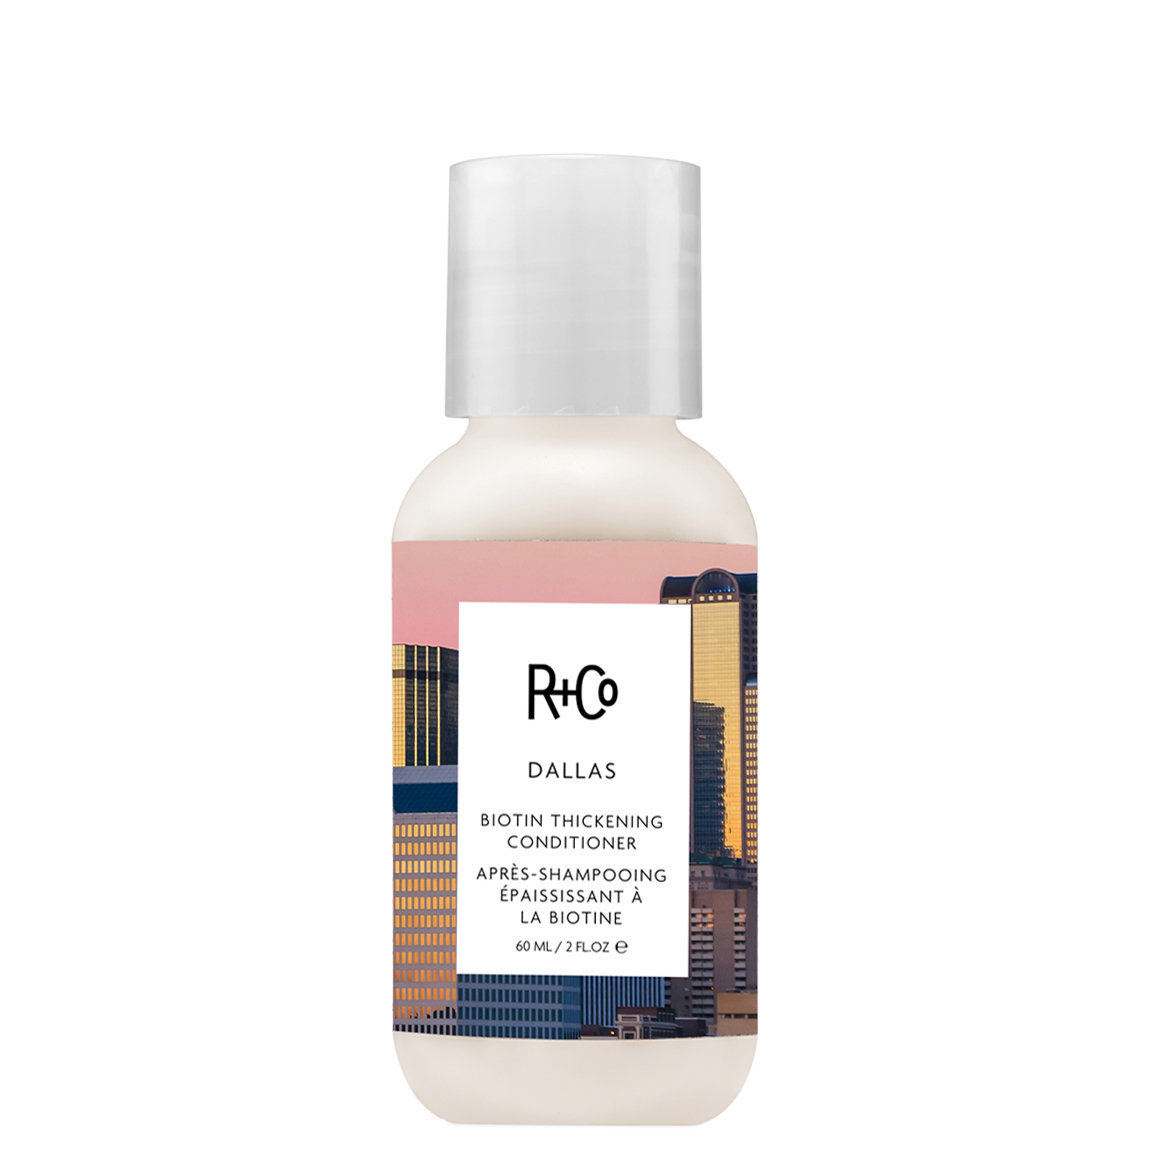 R+Co Dallas Thickening Conditioner  1.7 oz alternative view 1 - product swatch.